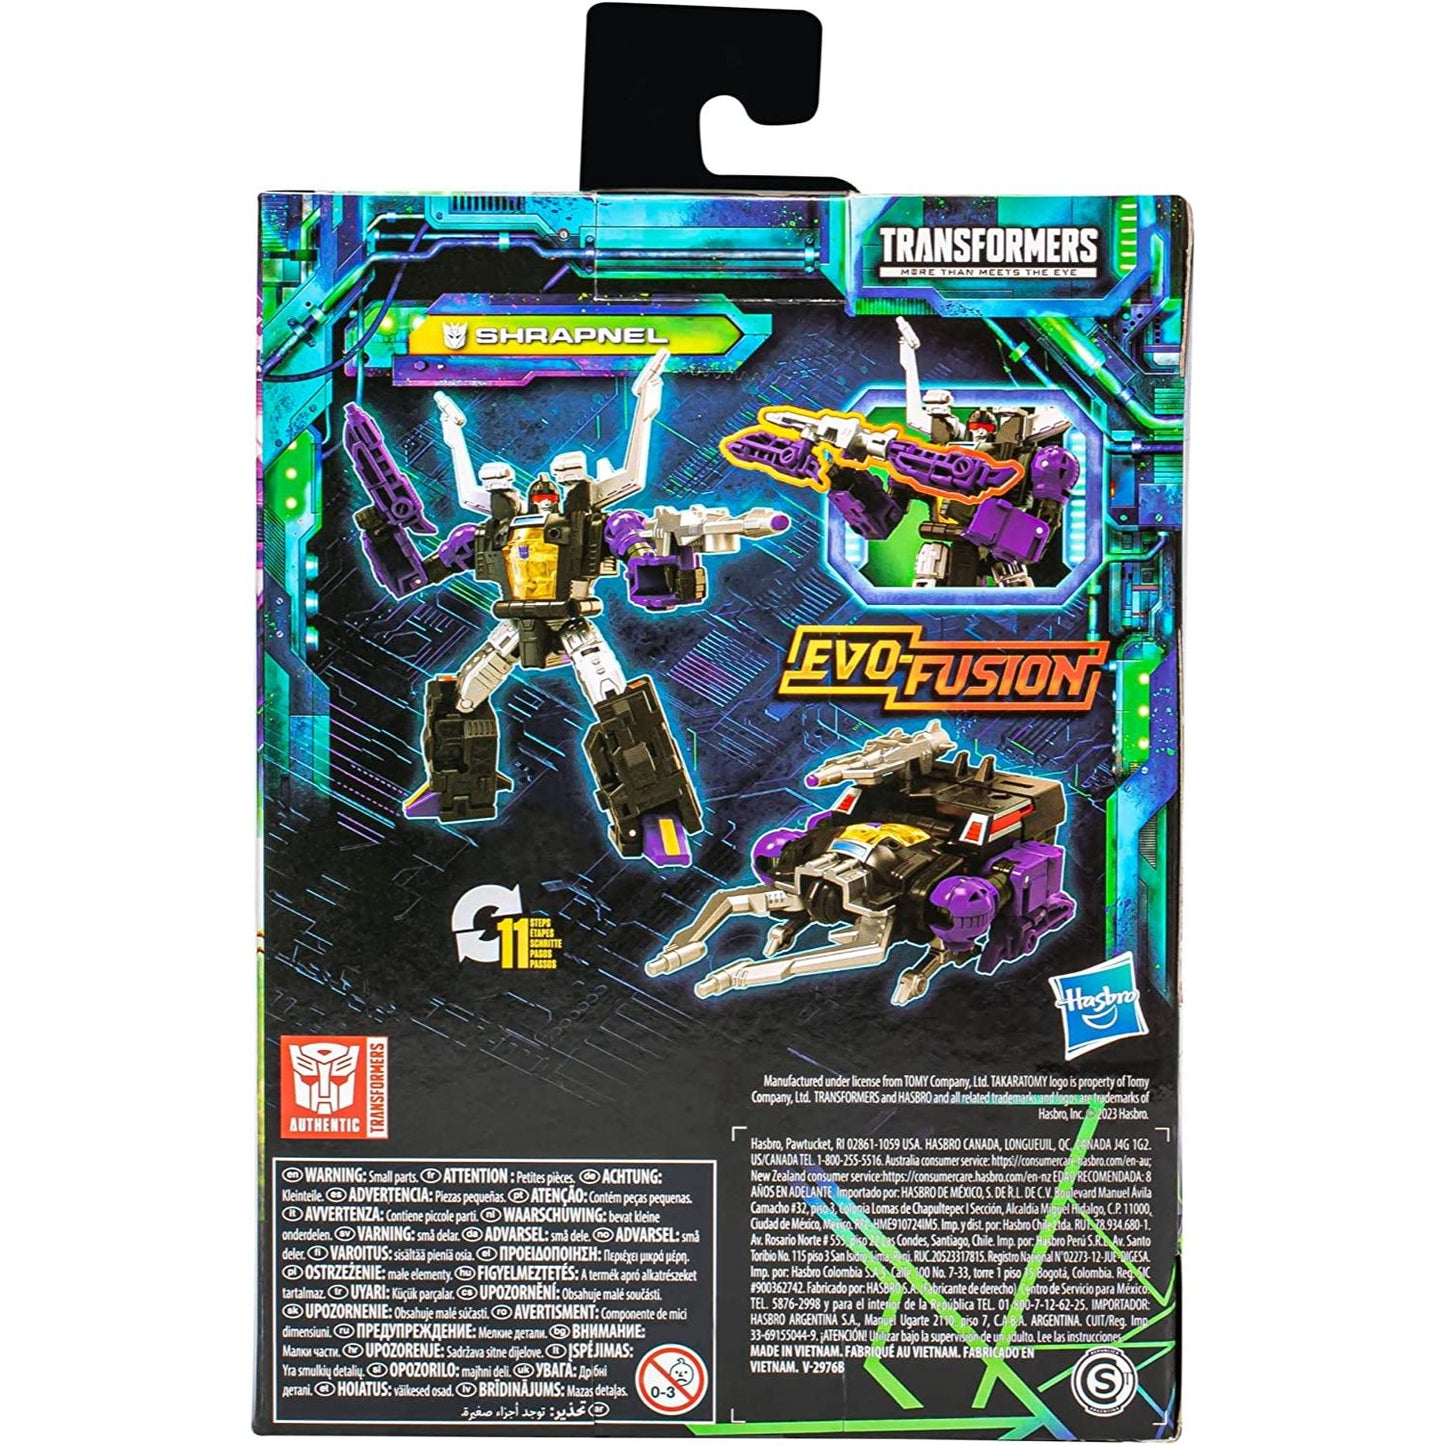 Transformers Generations Legacy Evolution Deluxe Shrapnel Action Figure Toy